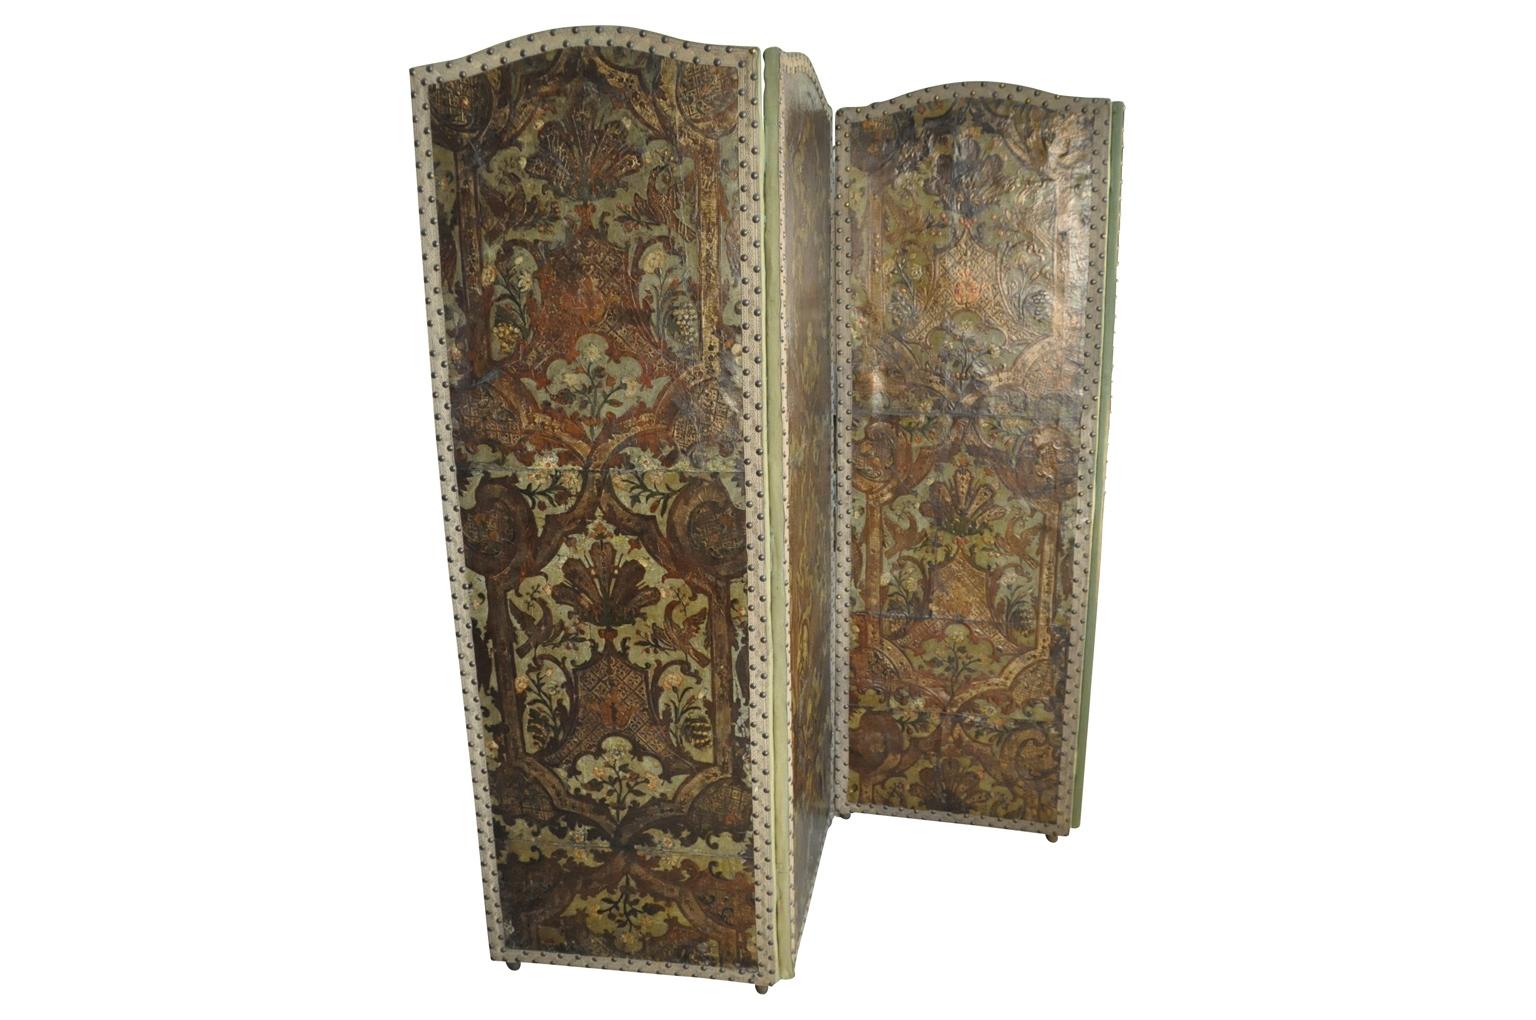 An exceptional 18th century Flemish 4-panel paravant - foldding screen. Beautifully constructed from hand tooled leather with magnificent polychrome. The colors are spectacular. Wonderful not only as a room divider, but wall-mounted as well. A